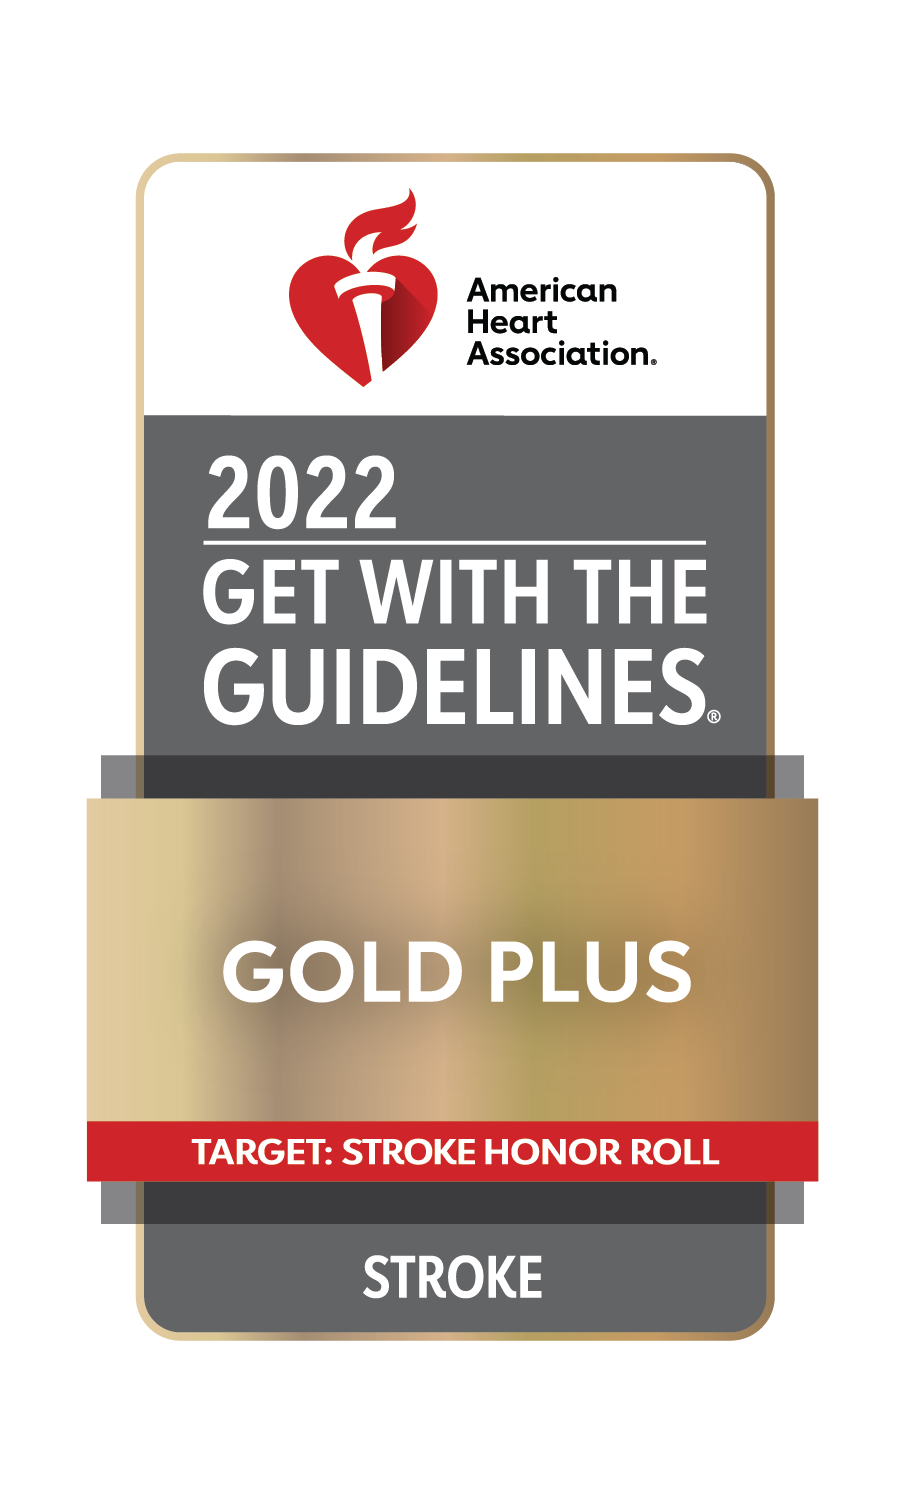 American Heart Association: 2022 Get with the Guidelines Gold Plus Target Stroke Honor Roll Award